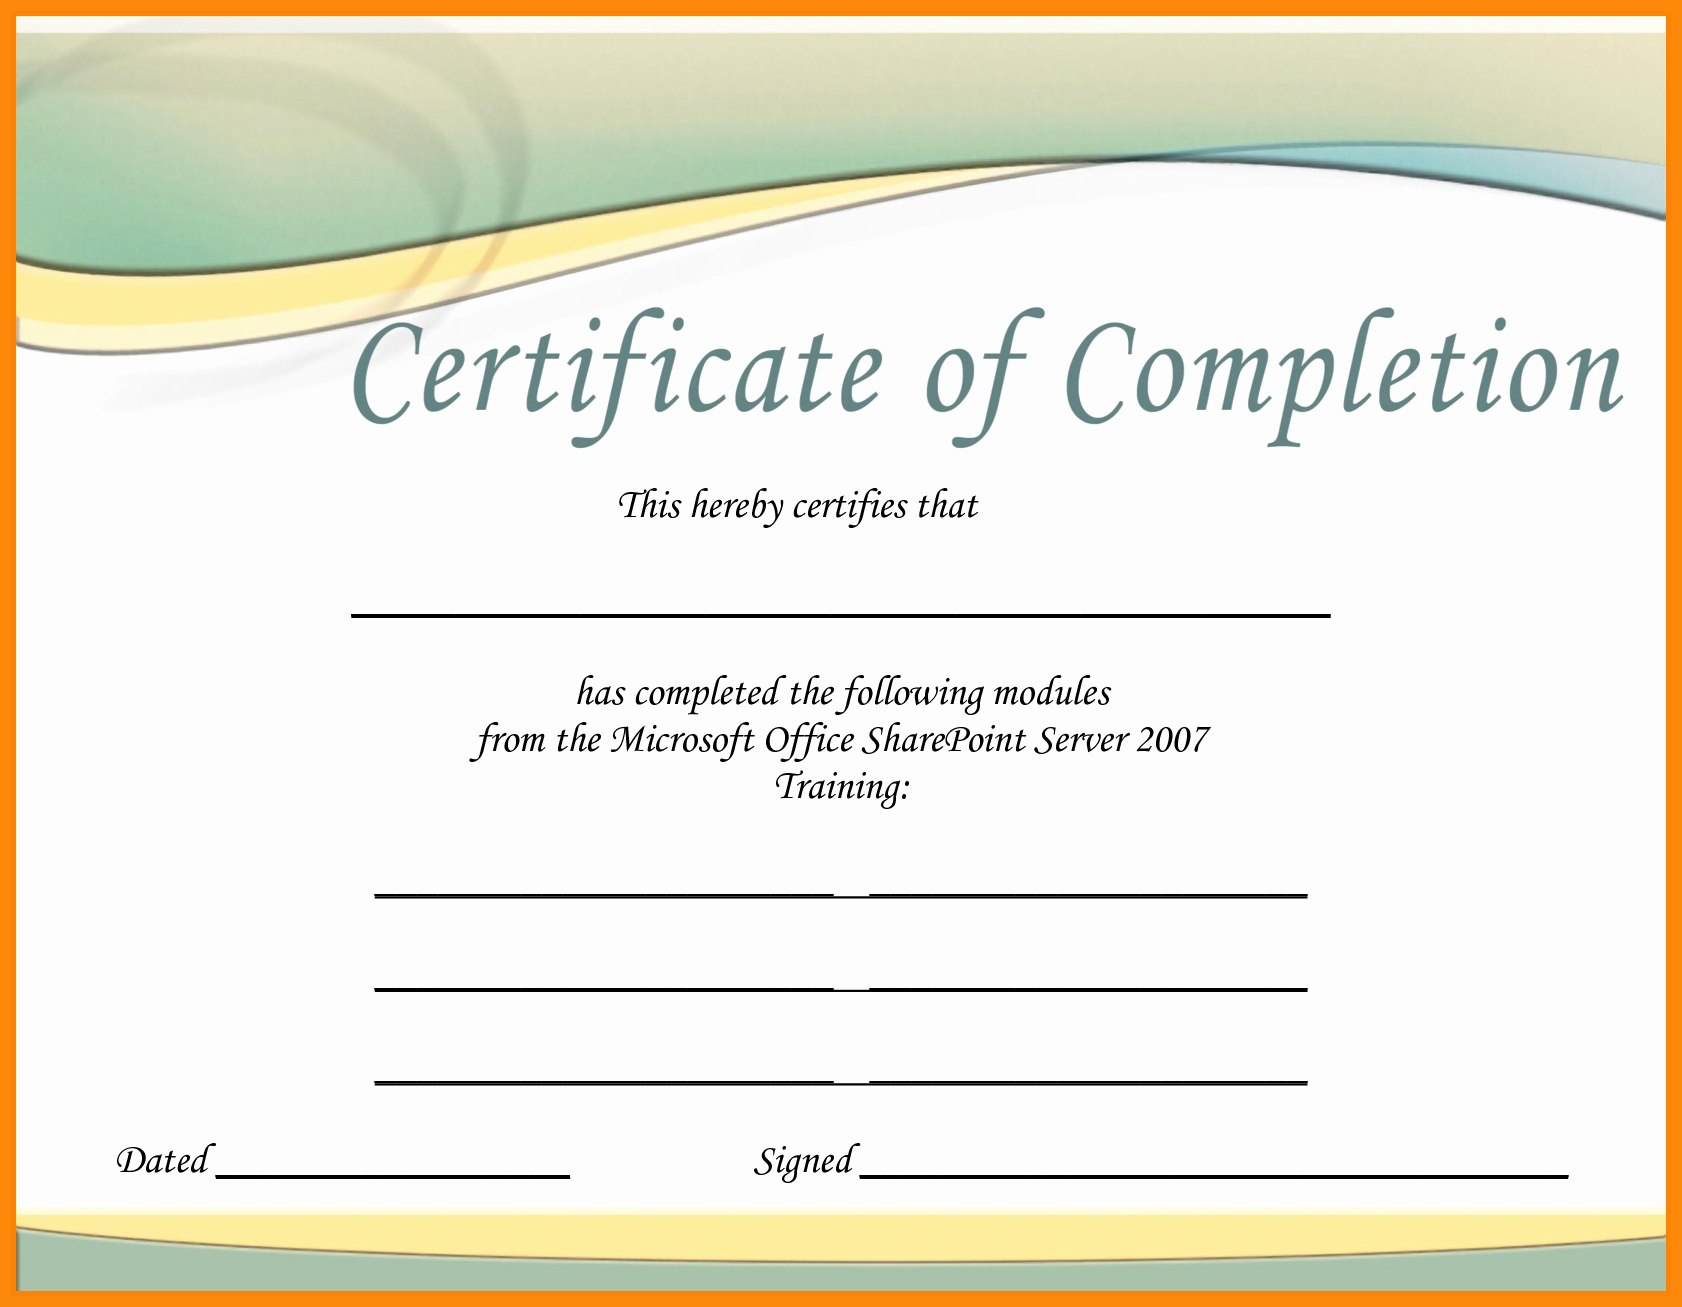 Certificate Template Archives - Atlantaauctionco Intended For Free Certificate Templates For Word 2007